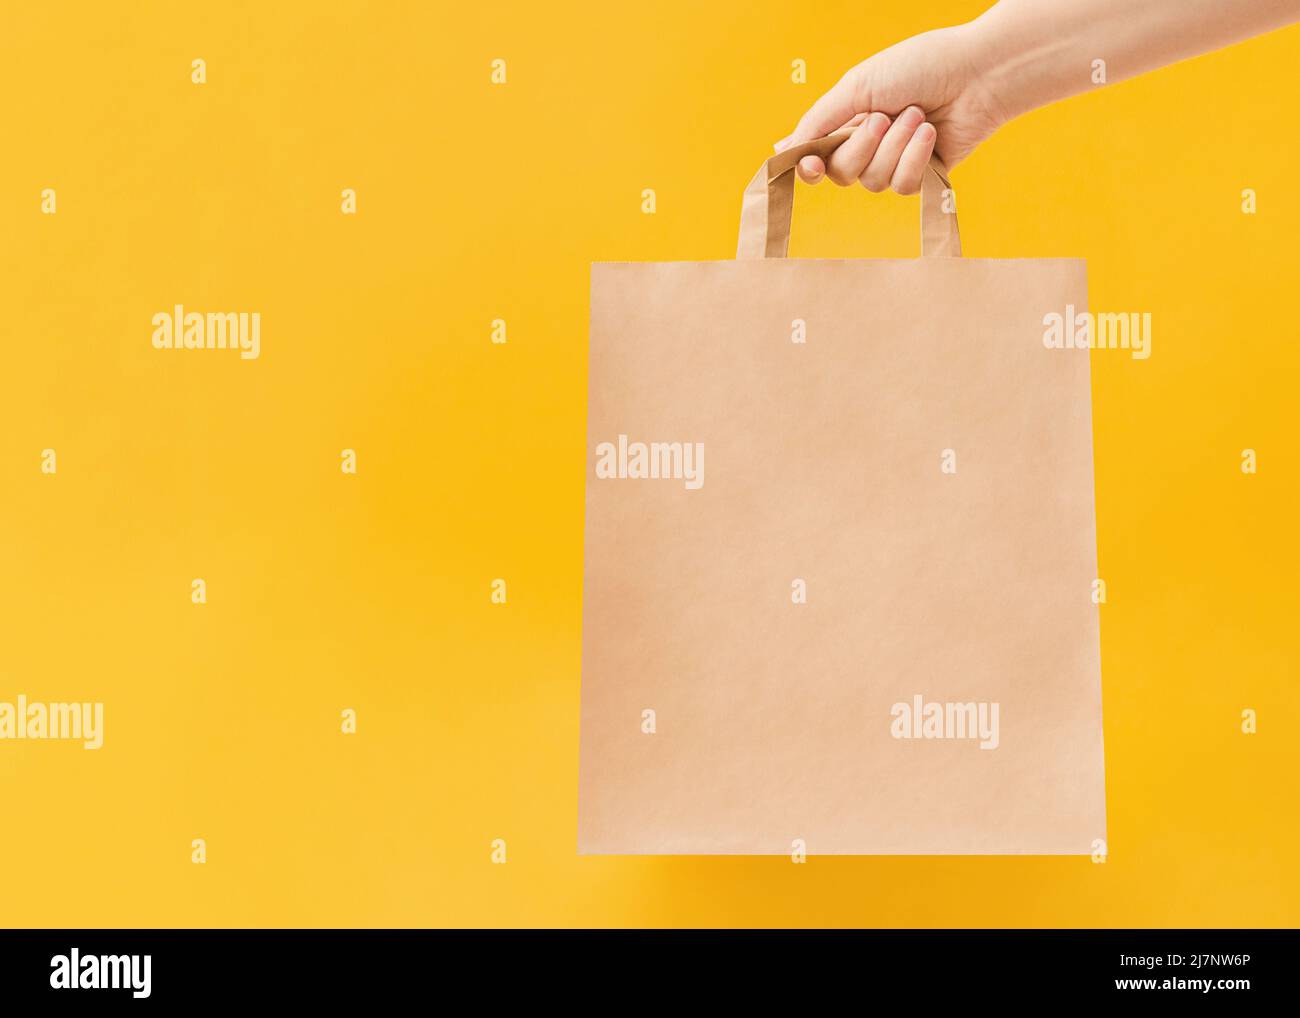 Woman is holding paper bag with handles on yellow backdrop Stock Photo